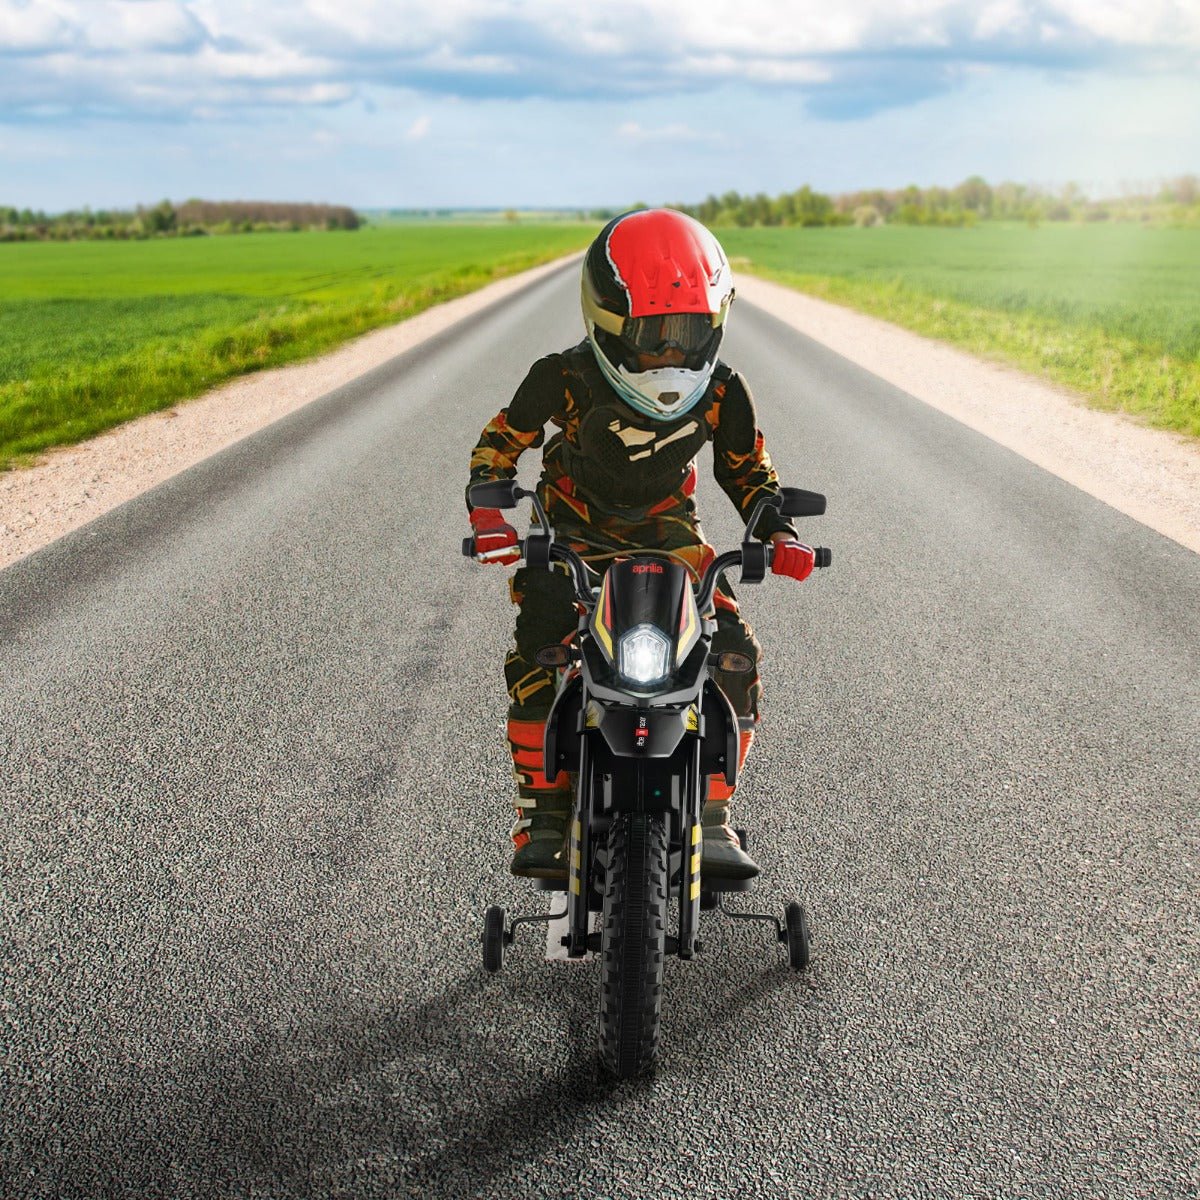 On the Road: Aprilia Kids Motorcycle Ride-On with Training Wheels, Black